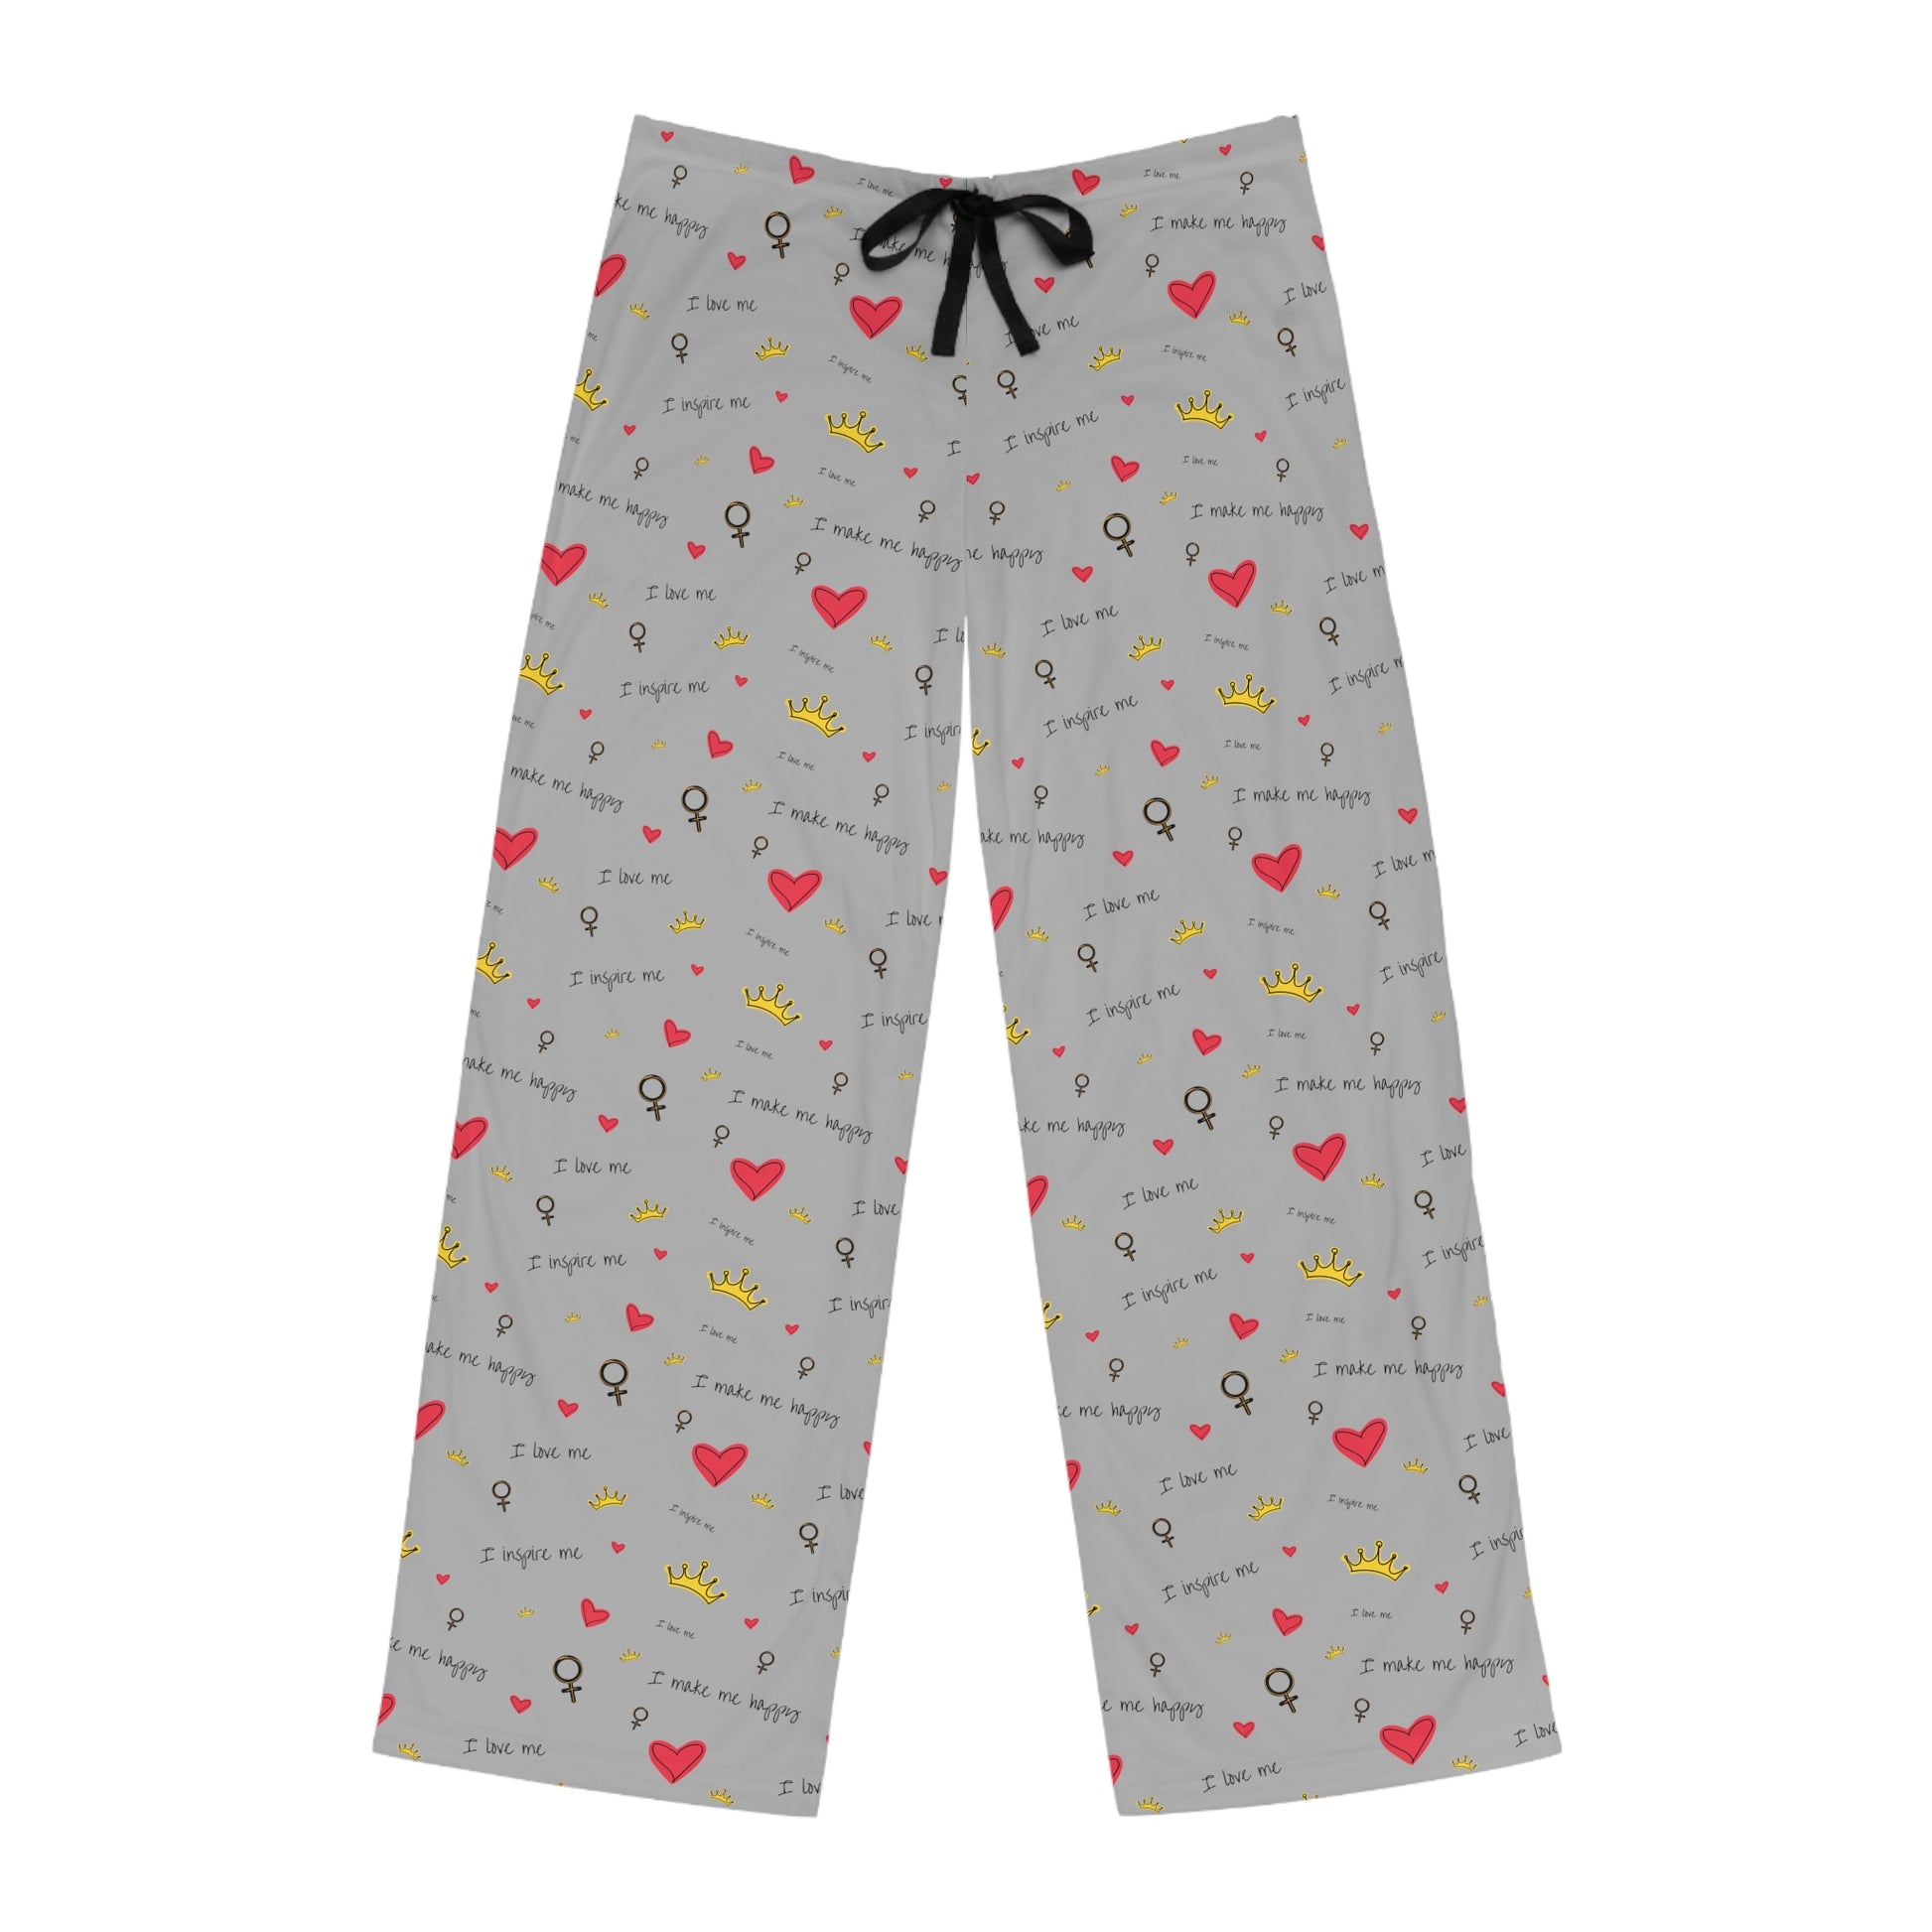 These Printify men's pajama pants are made of 100% polyester and feature hearts, making them the perfect Valentine's Day gift.